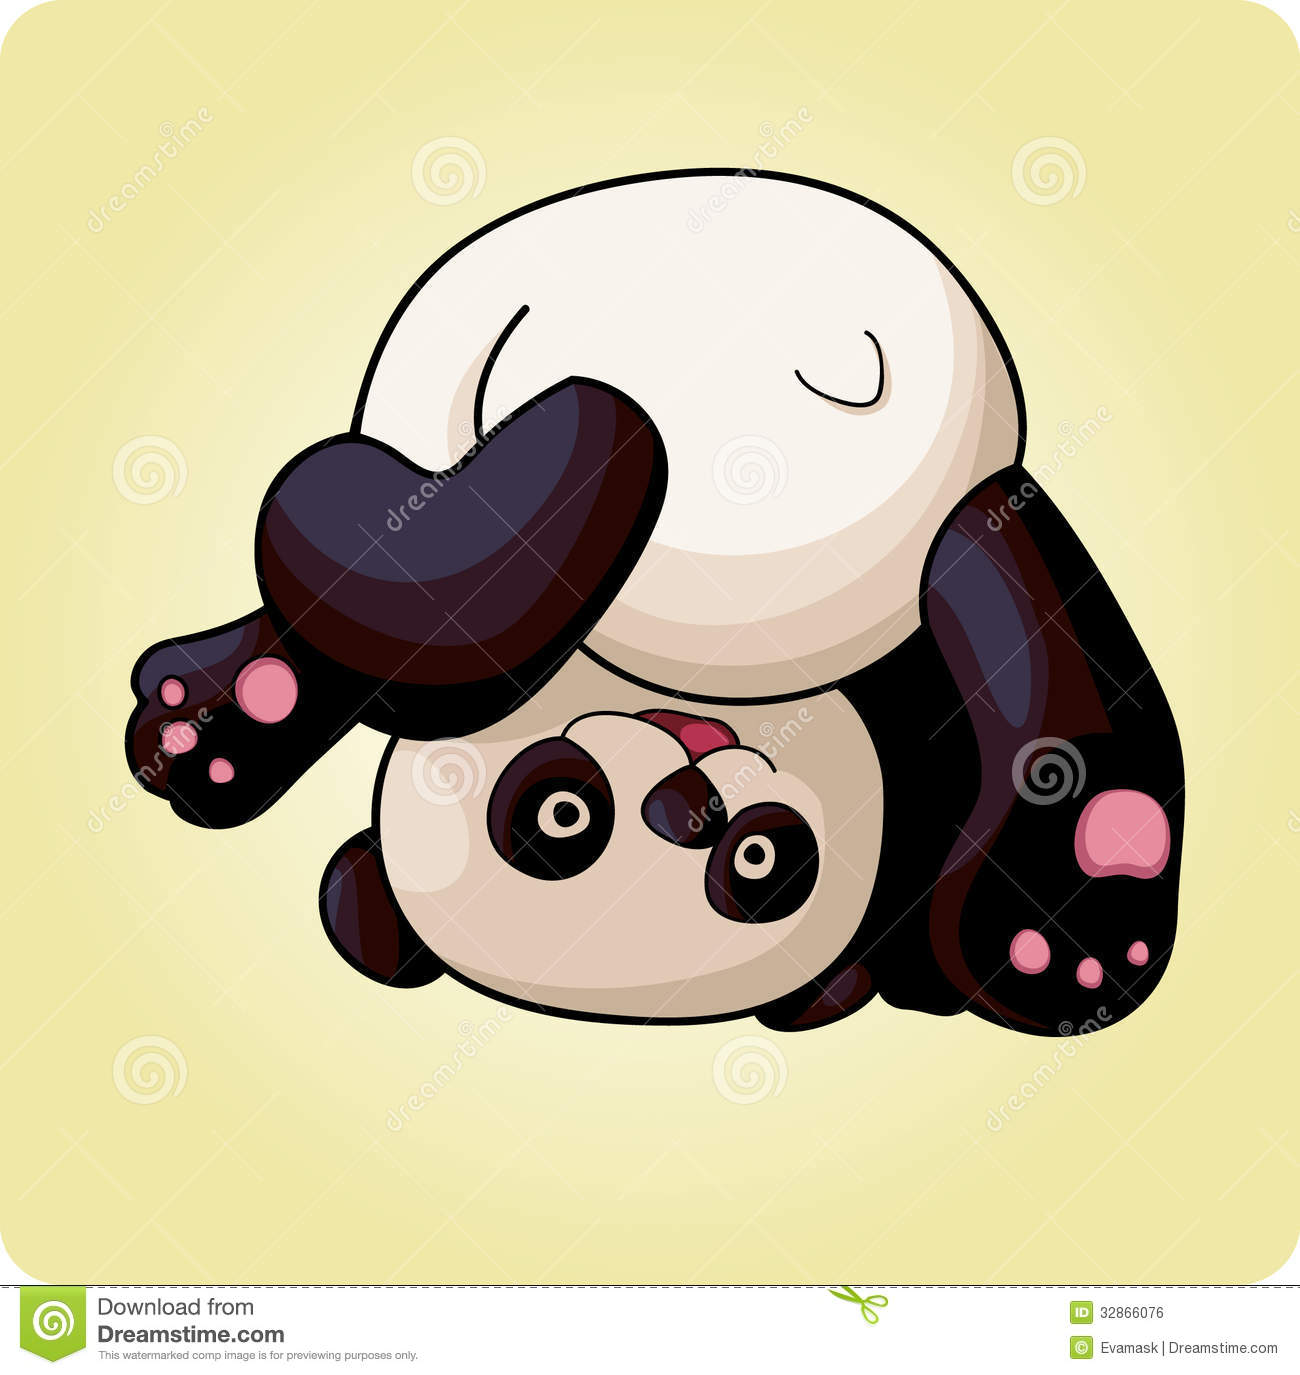 Funny Panda Does A Somersault Royalty Free Stock Image   Image